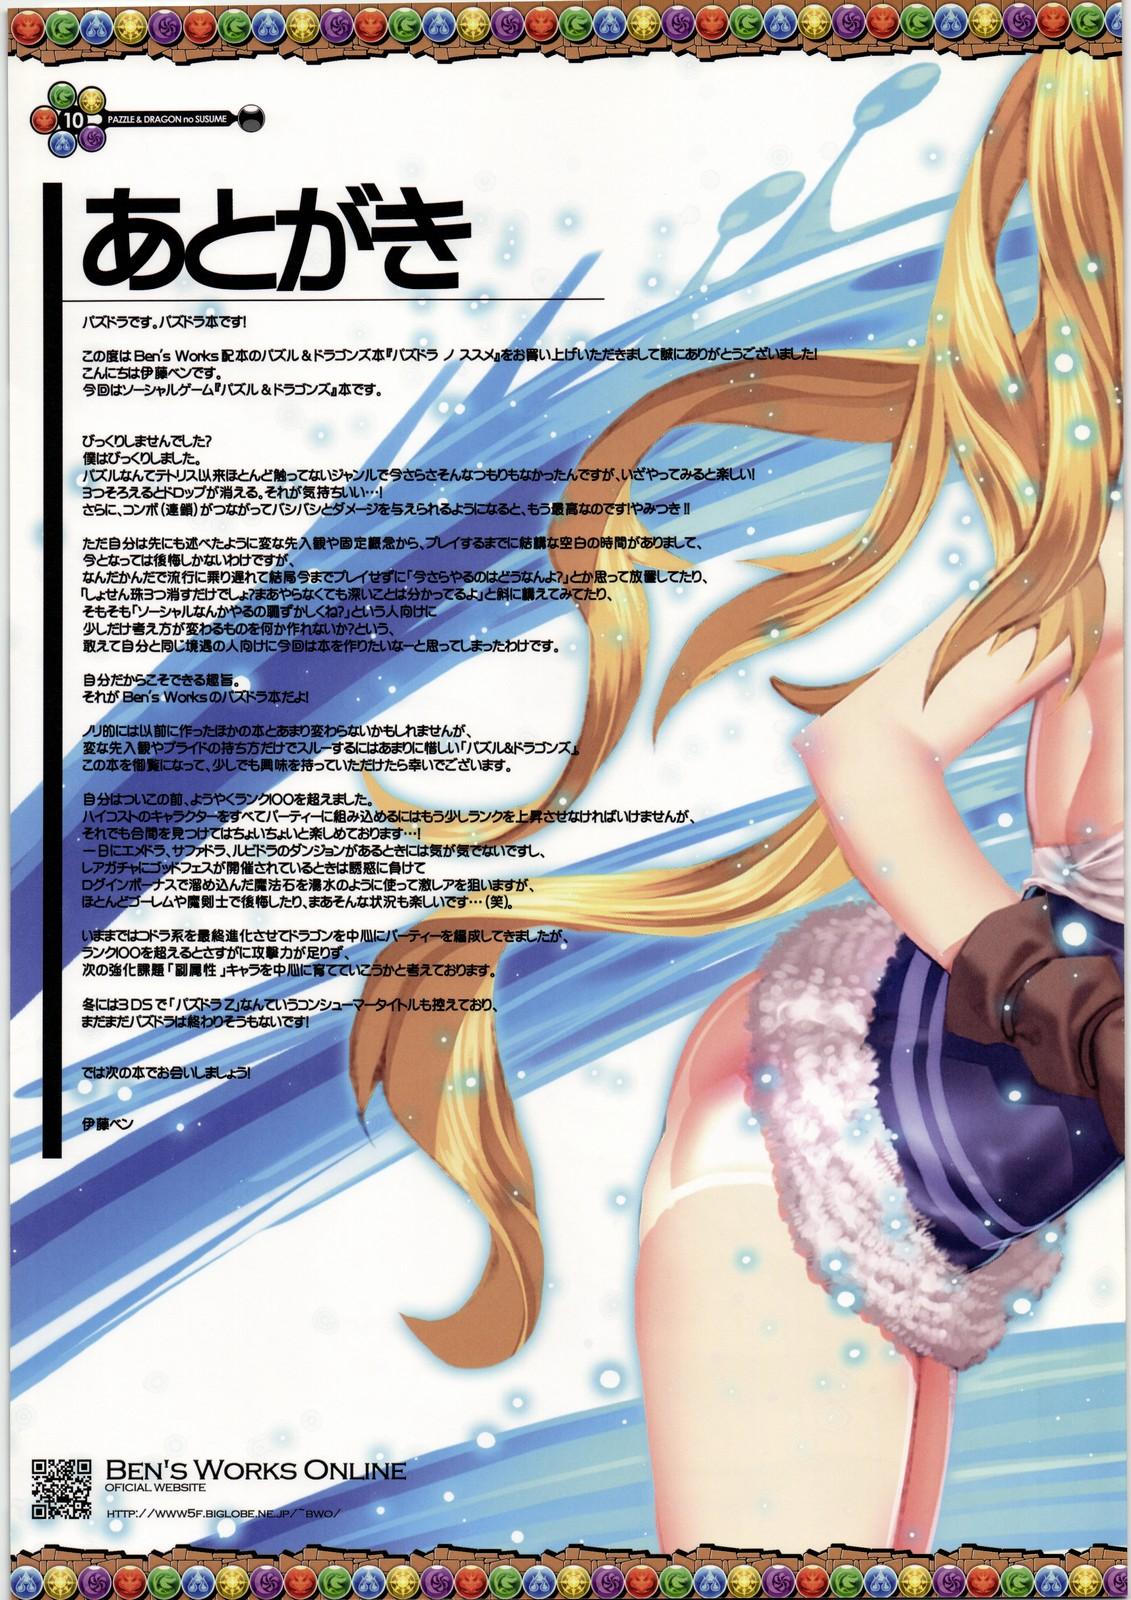 Sucking Dicks PAZZLE & DRAGONS no SUSUME - Puzzle and dragons Egypt - Page 10